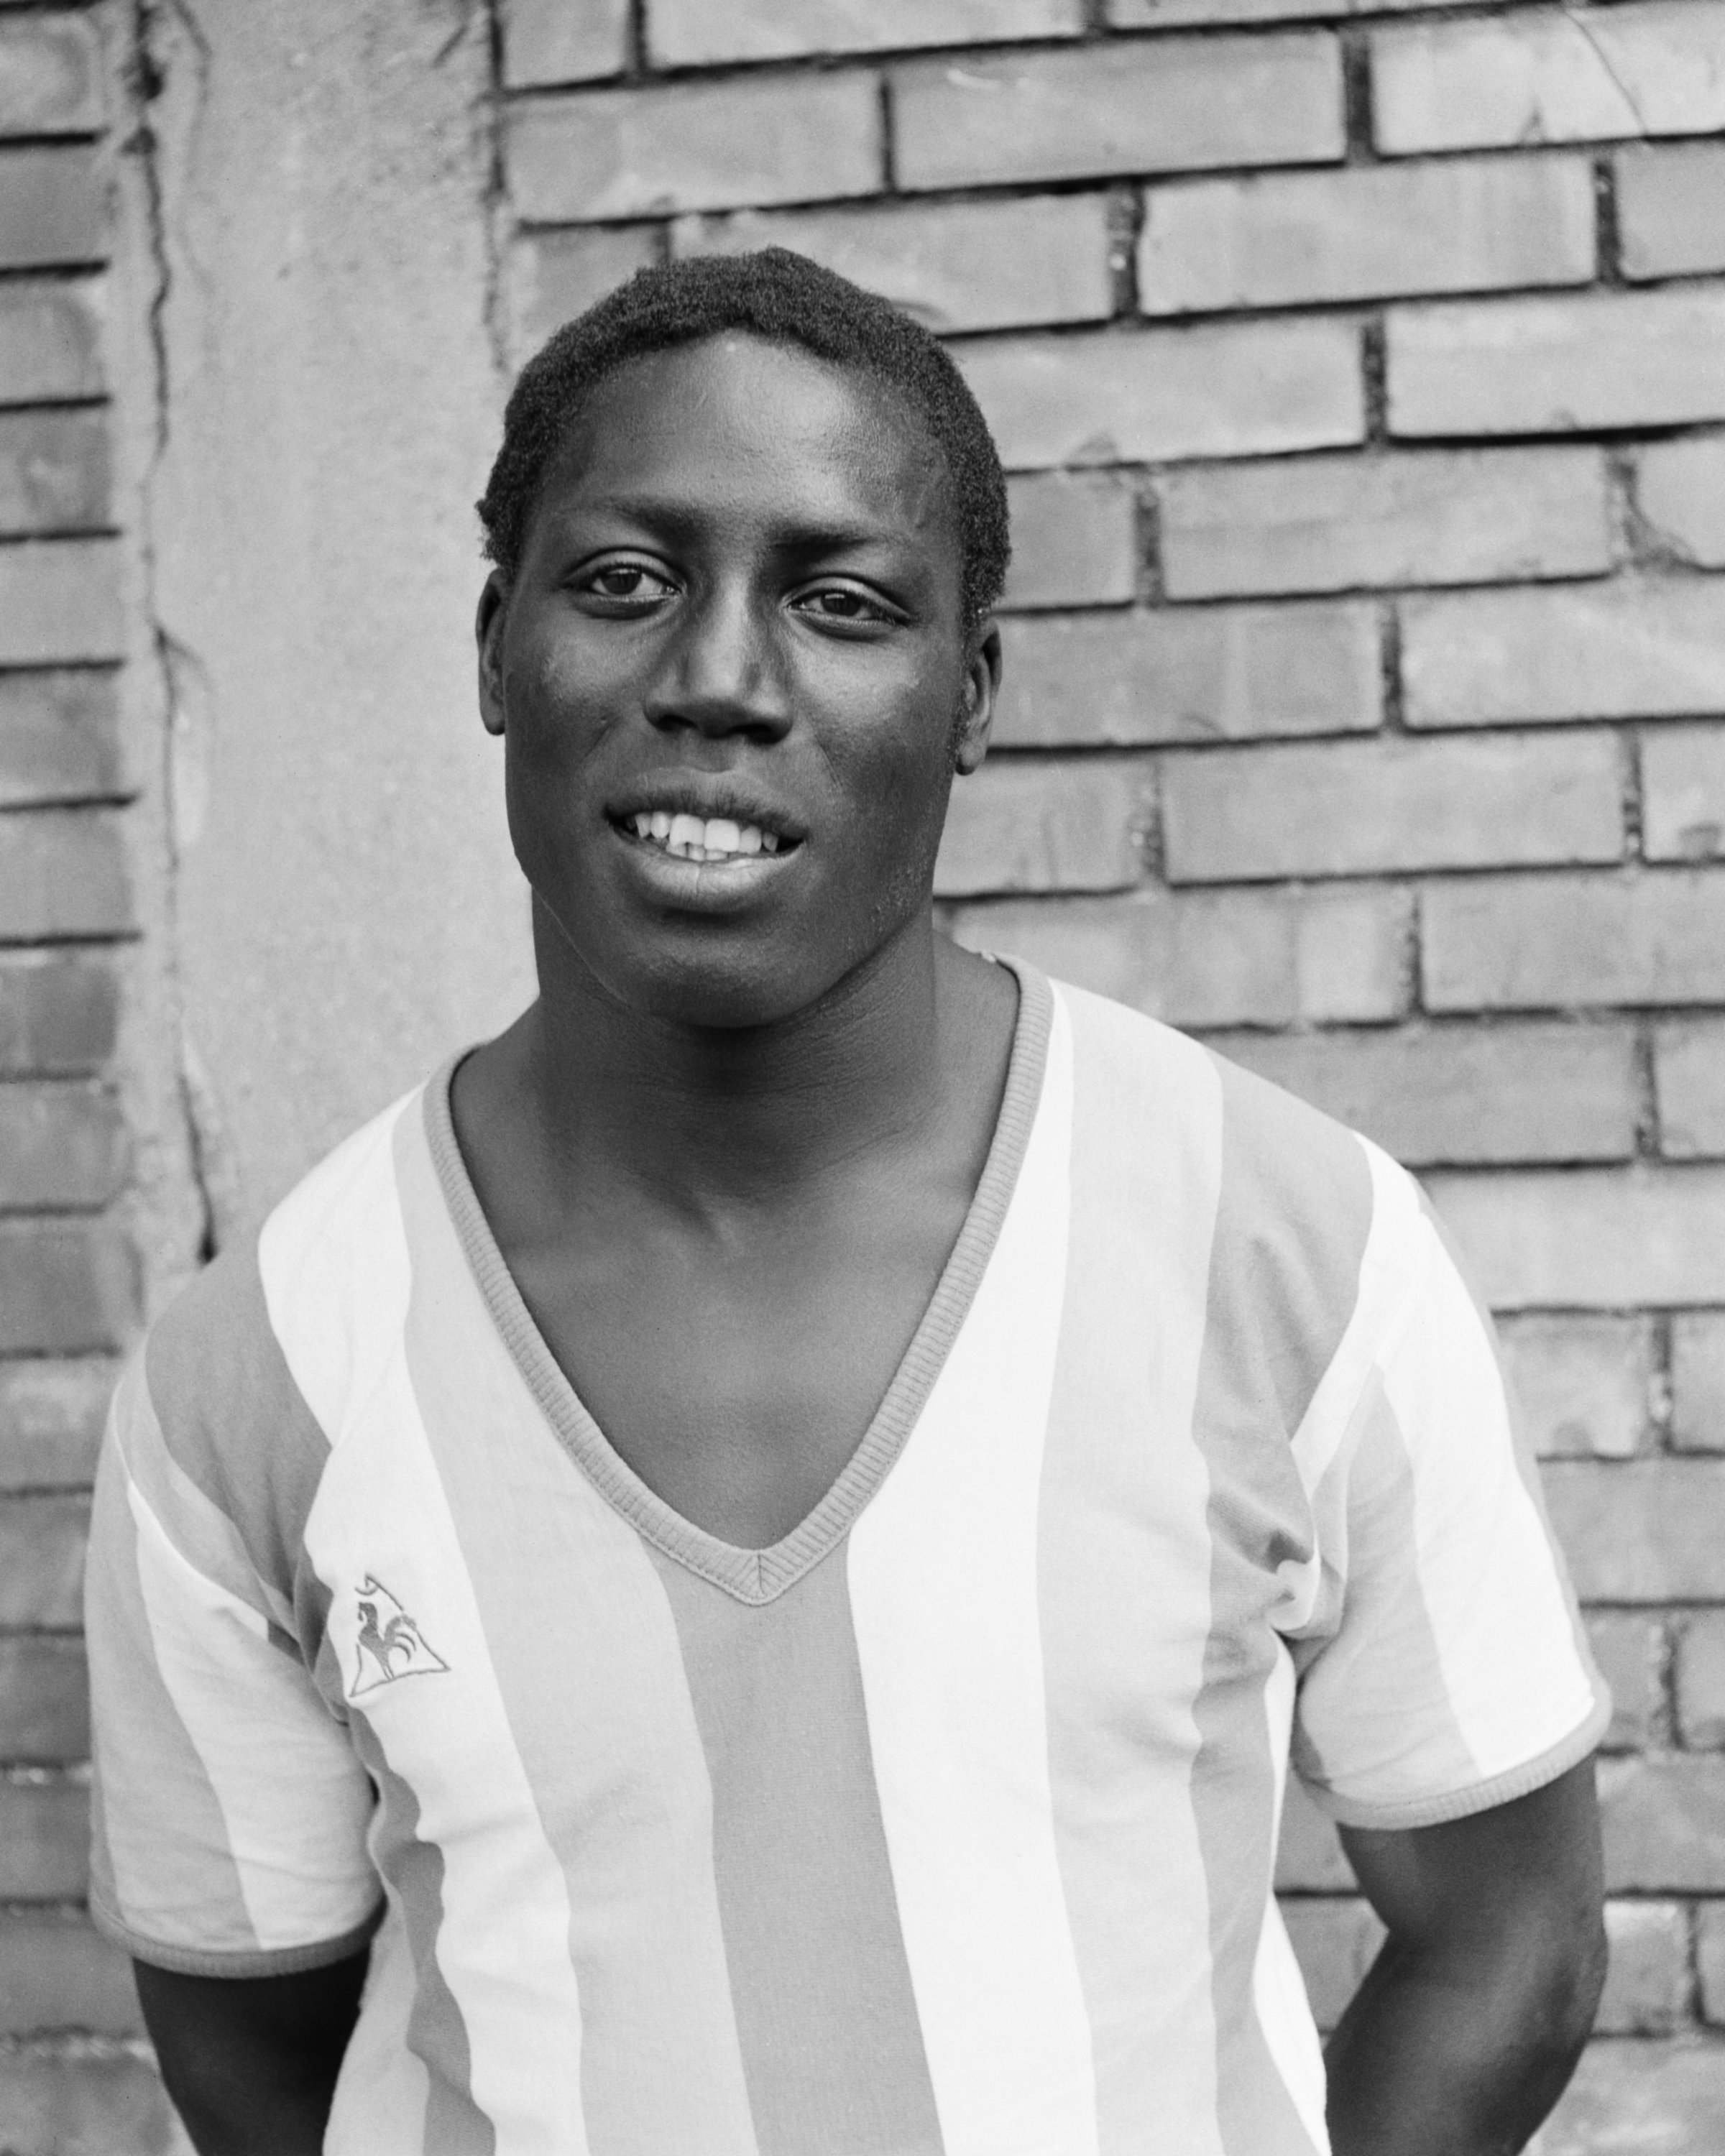 This undated photo shows French defender Jean-Pierre Adams.